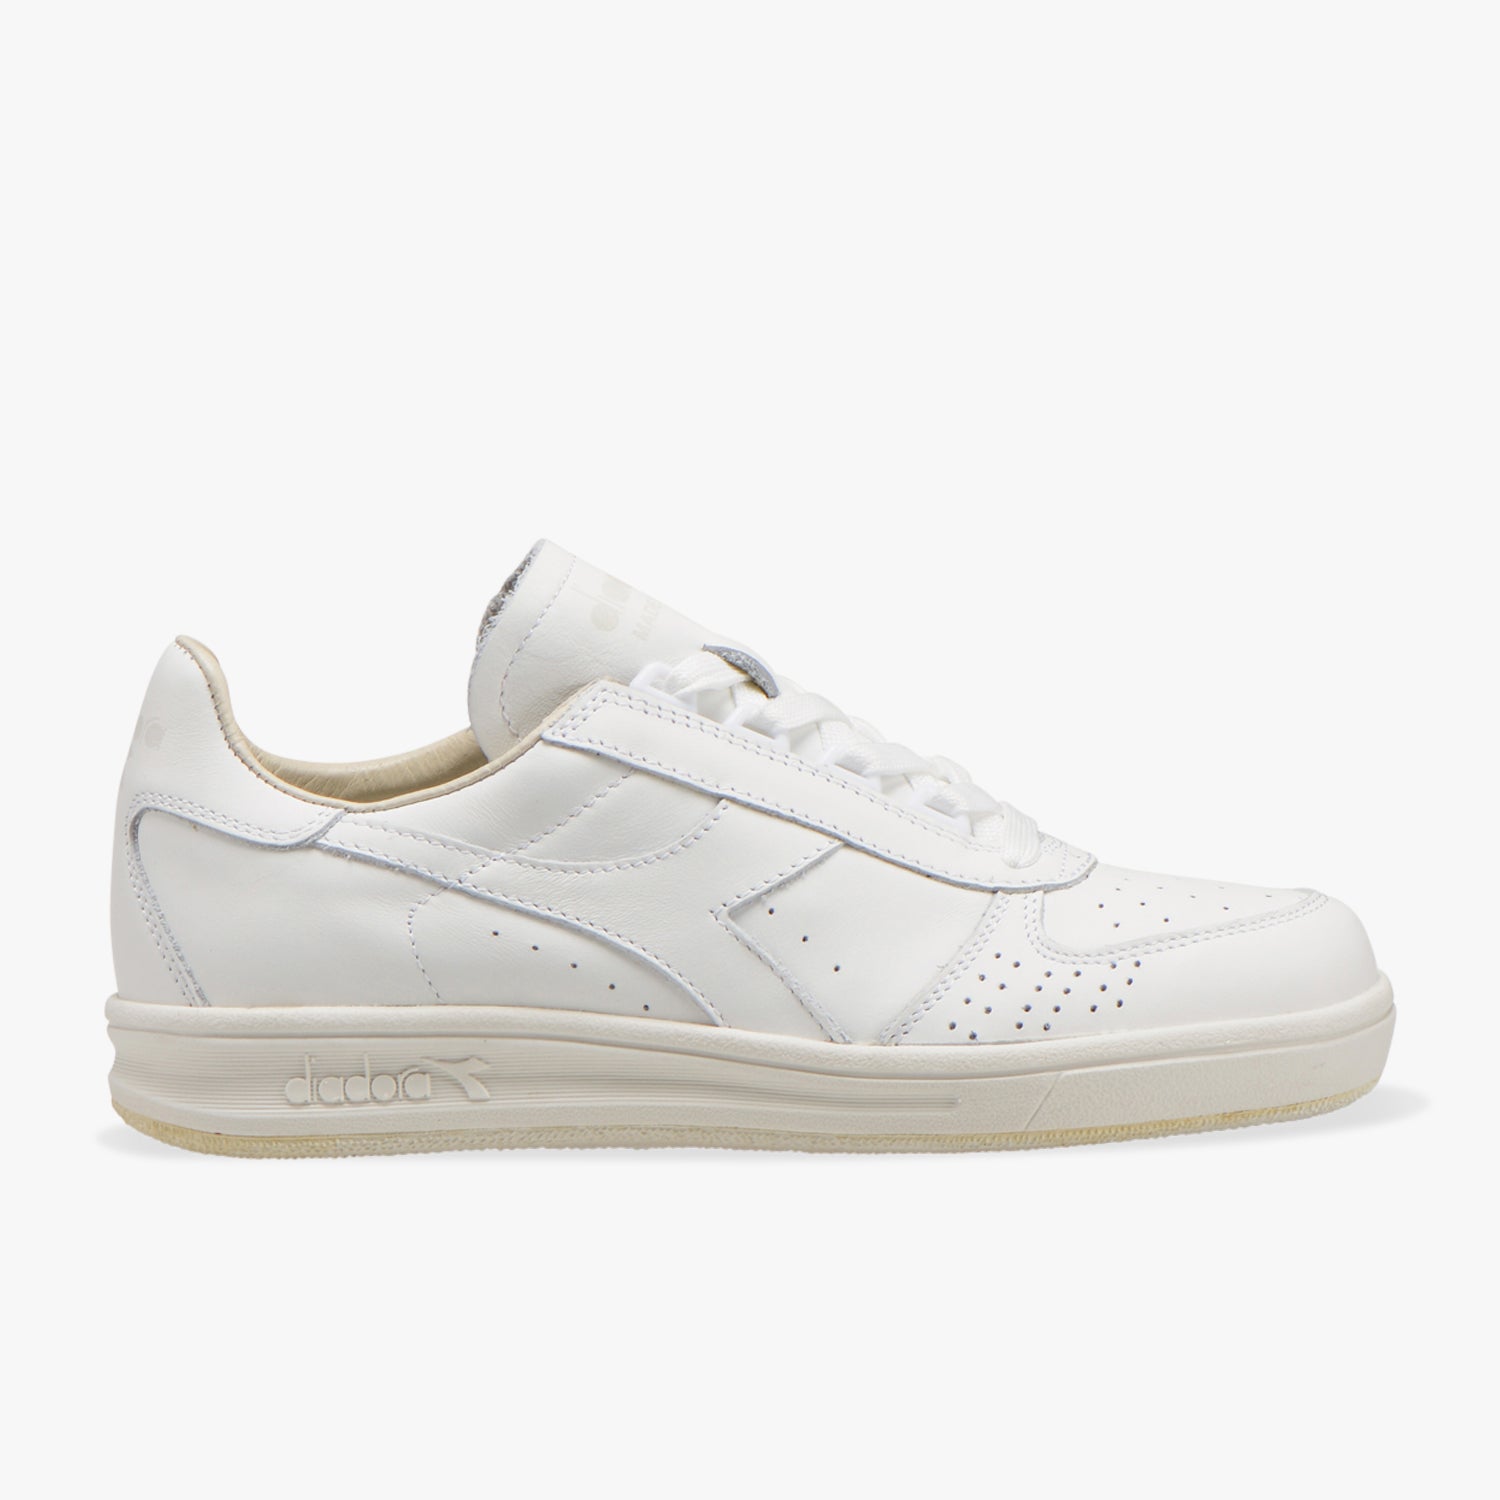 The B.Elite lifestyle shoe is a brand icon at diadora and in the footwear world.  This style has been brought back to evoke the 1980 OG model created to celebrate the epic tennis players of the '80's.   This Heritage sneaker is Made in Italy and crafted from premium leather with pigskin detailing. The Italian design and skilled craftsmanship is immediately obvious once you take this style out of the box.